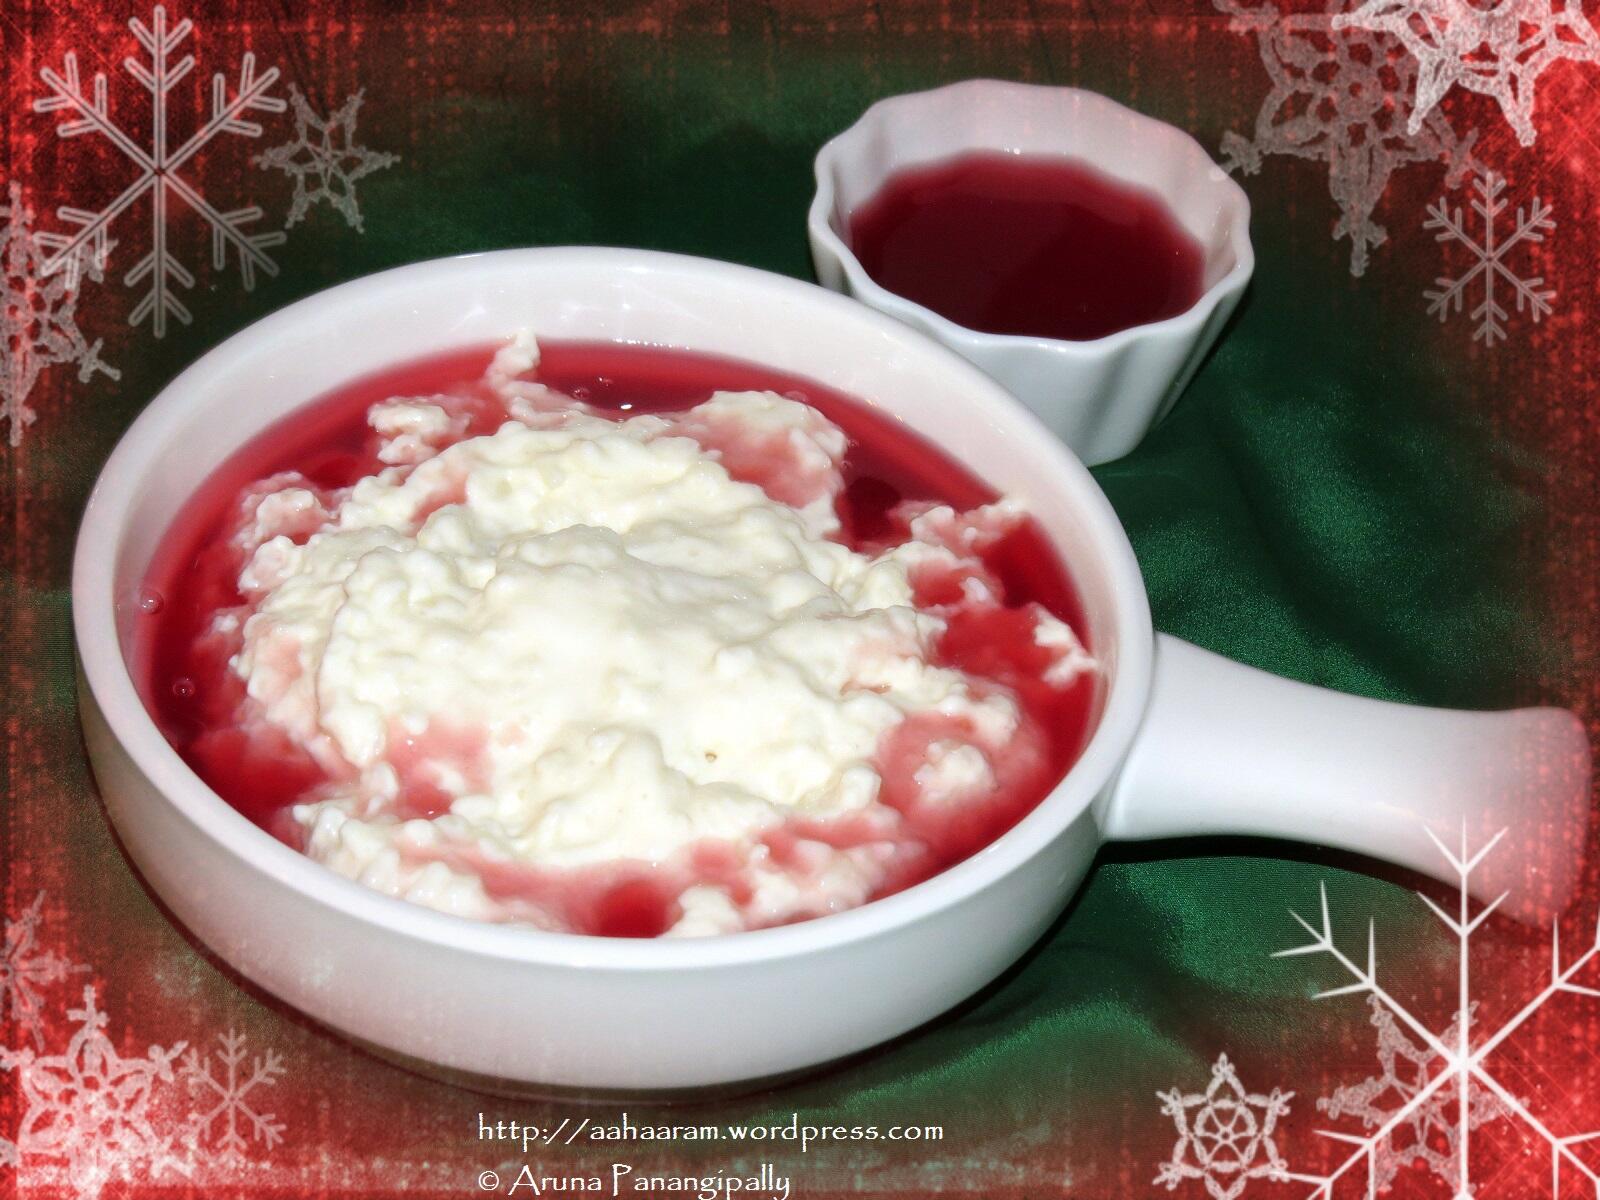 Riskrem - A Creamy Christmas Rice Pudding from Norway